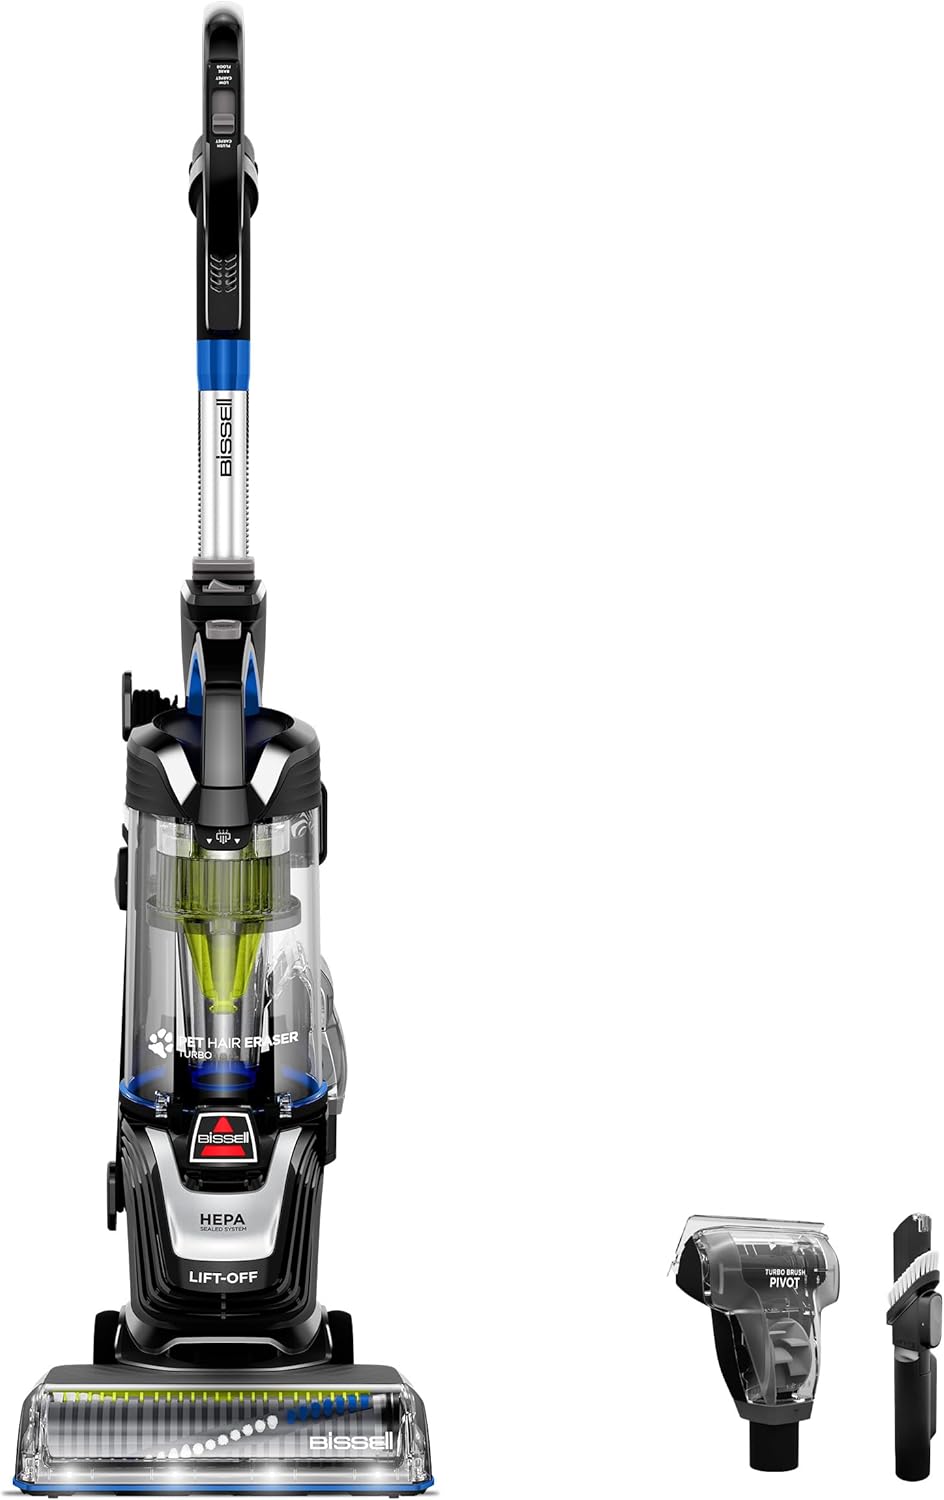 BISSELL Pet Hair Eraser Turbo Lift-Off Vacuum, w/ Self-Cleaning Brush Roll, HEPA Filtration, Powerful Pickup with TurboBrush Pivot Tool & LED-lit dusting & Crevice Tool, 3774F